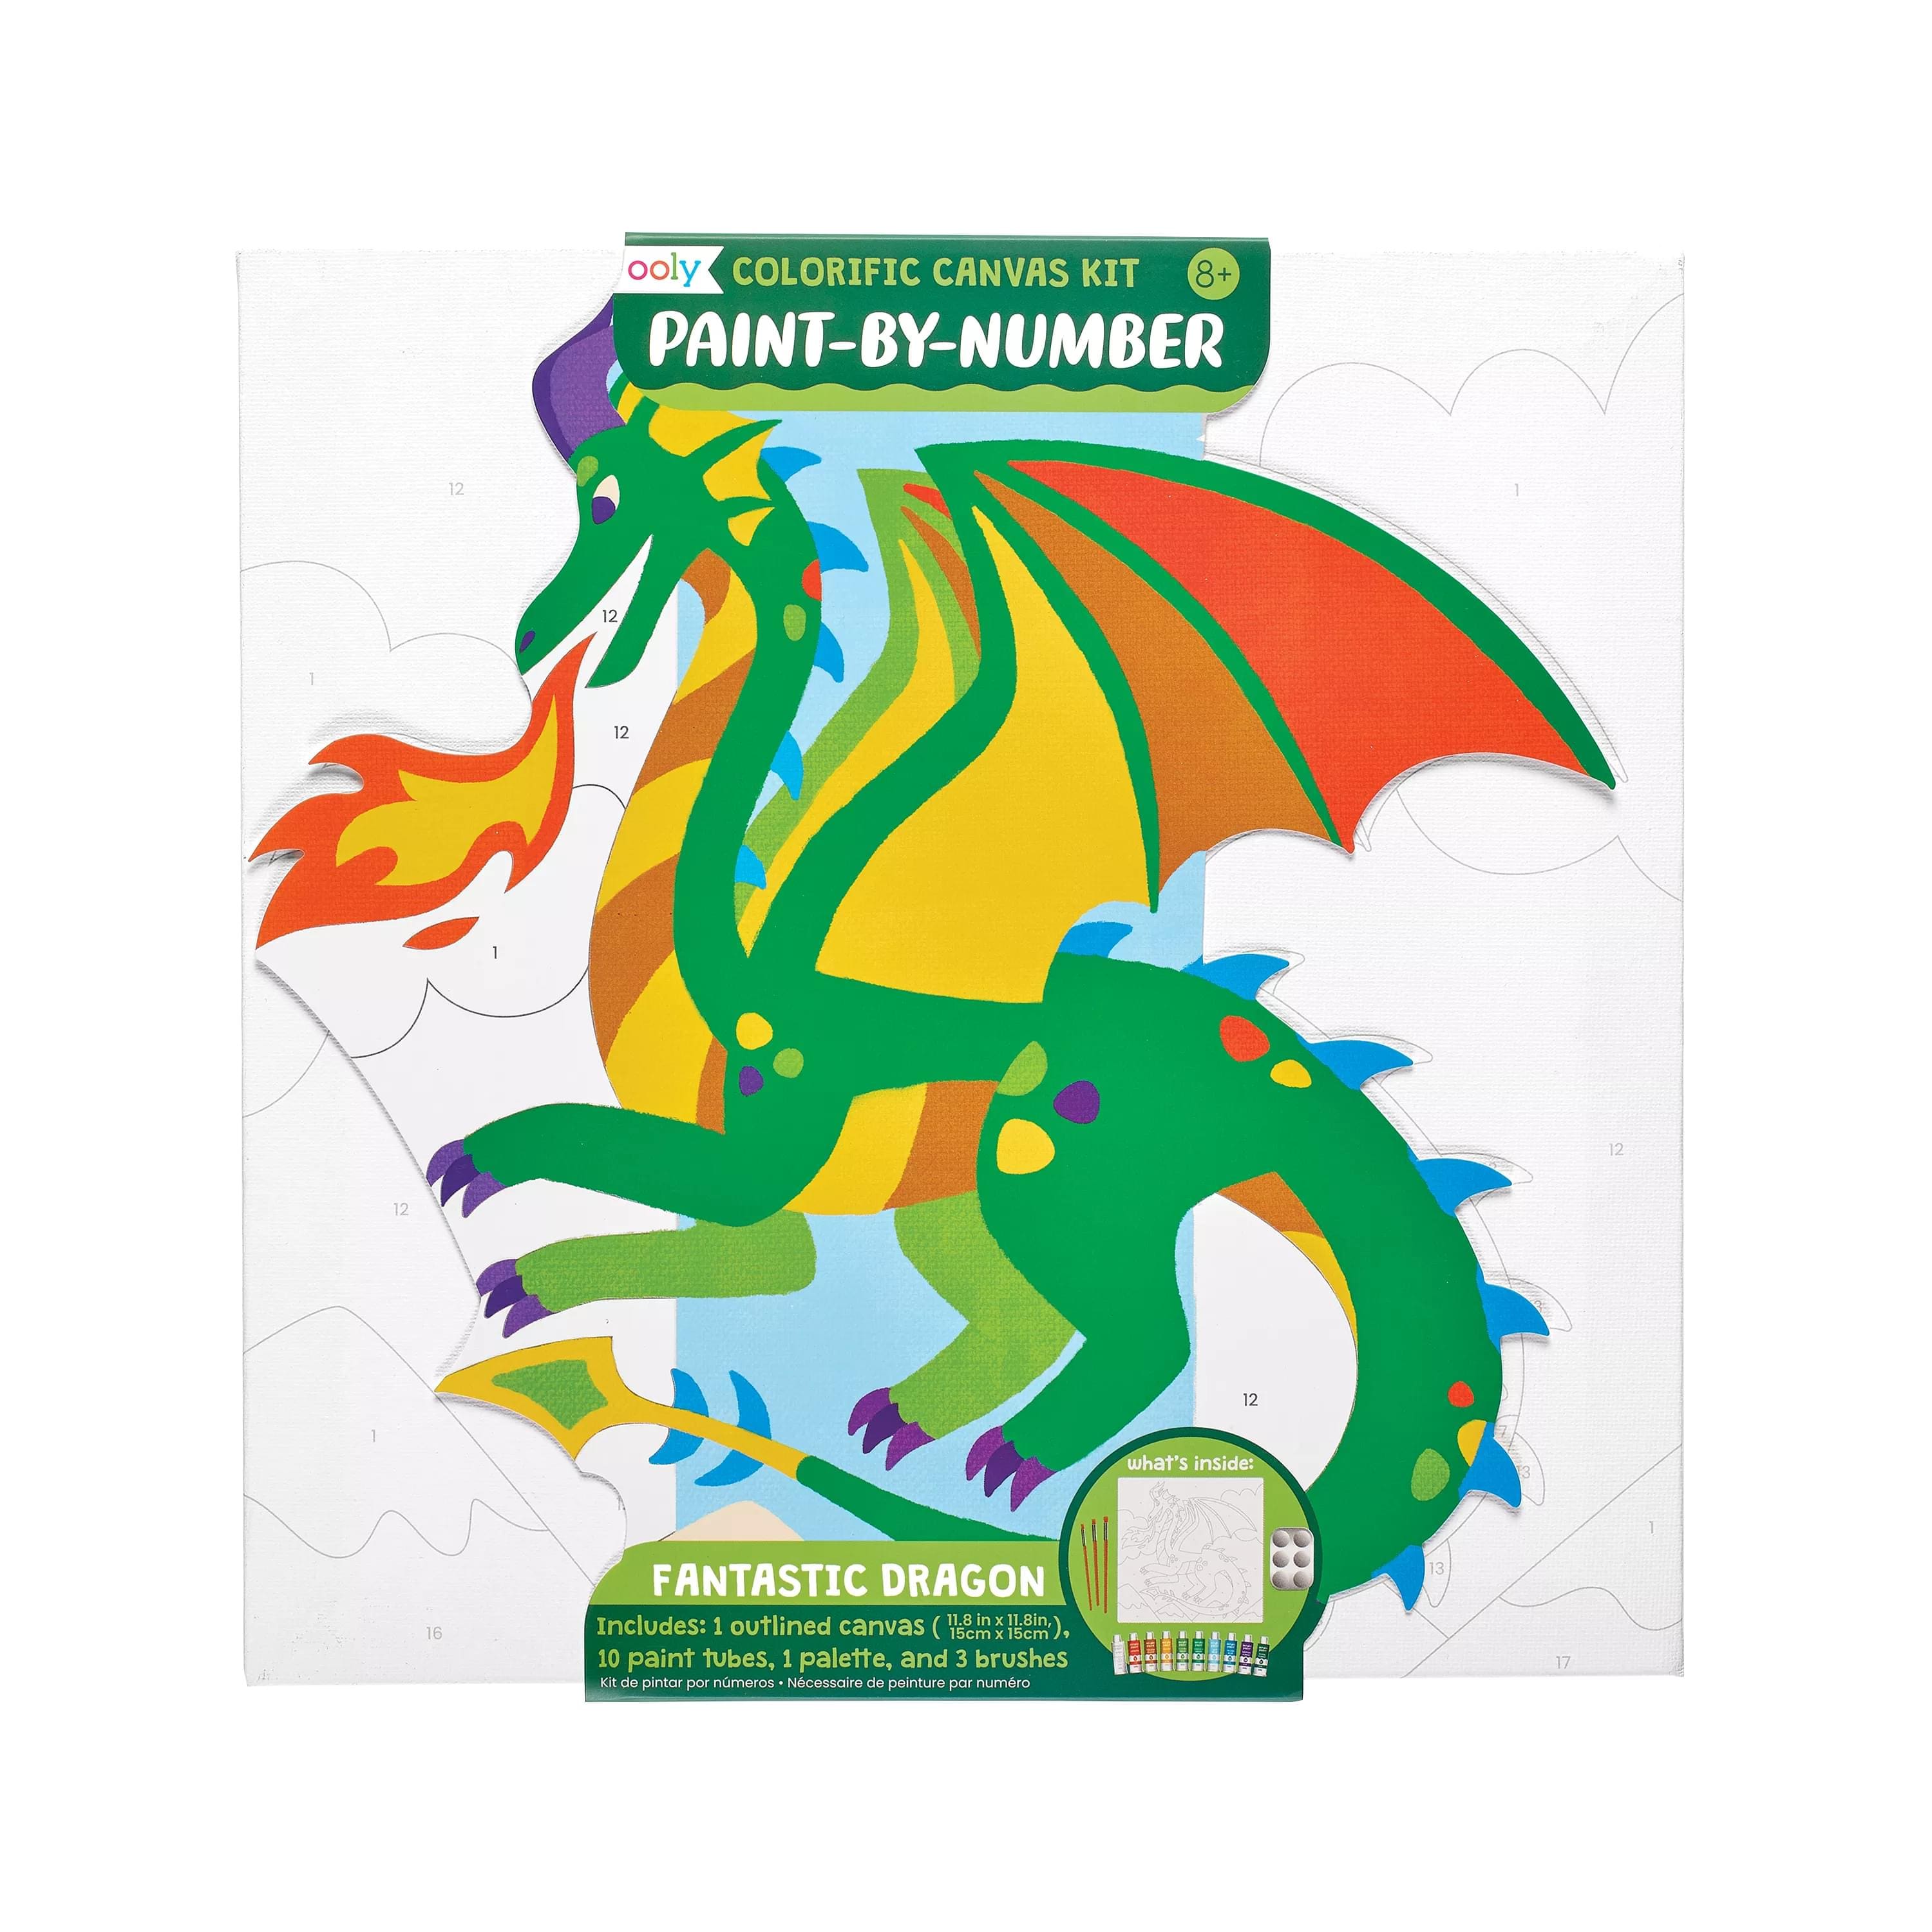 OOLY Colorific Canvas Fantastic Dragon Paint-By-Number Kit